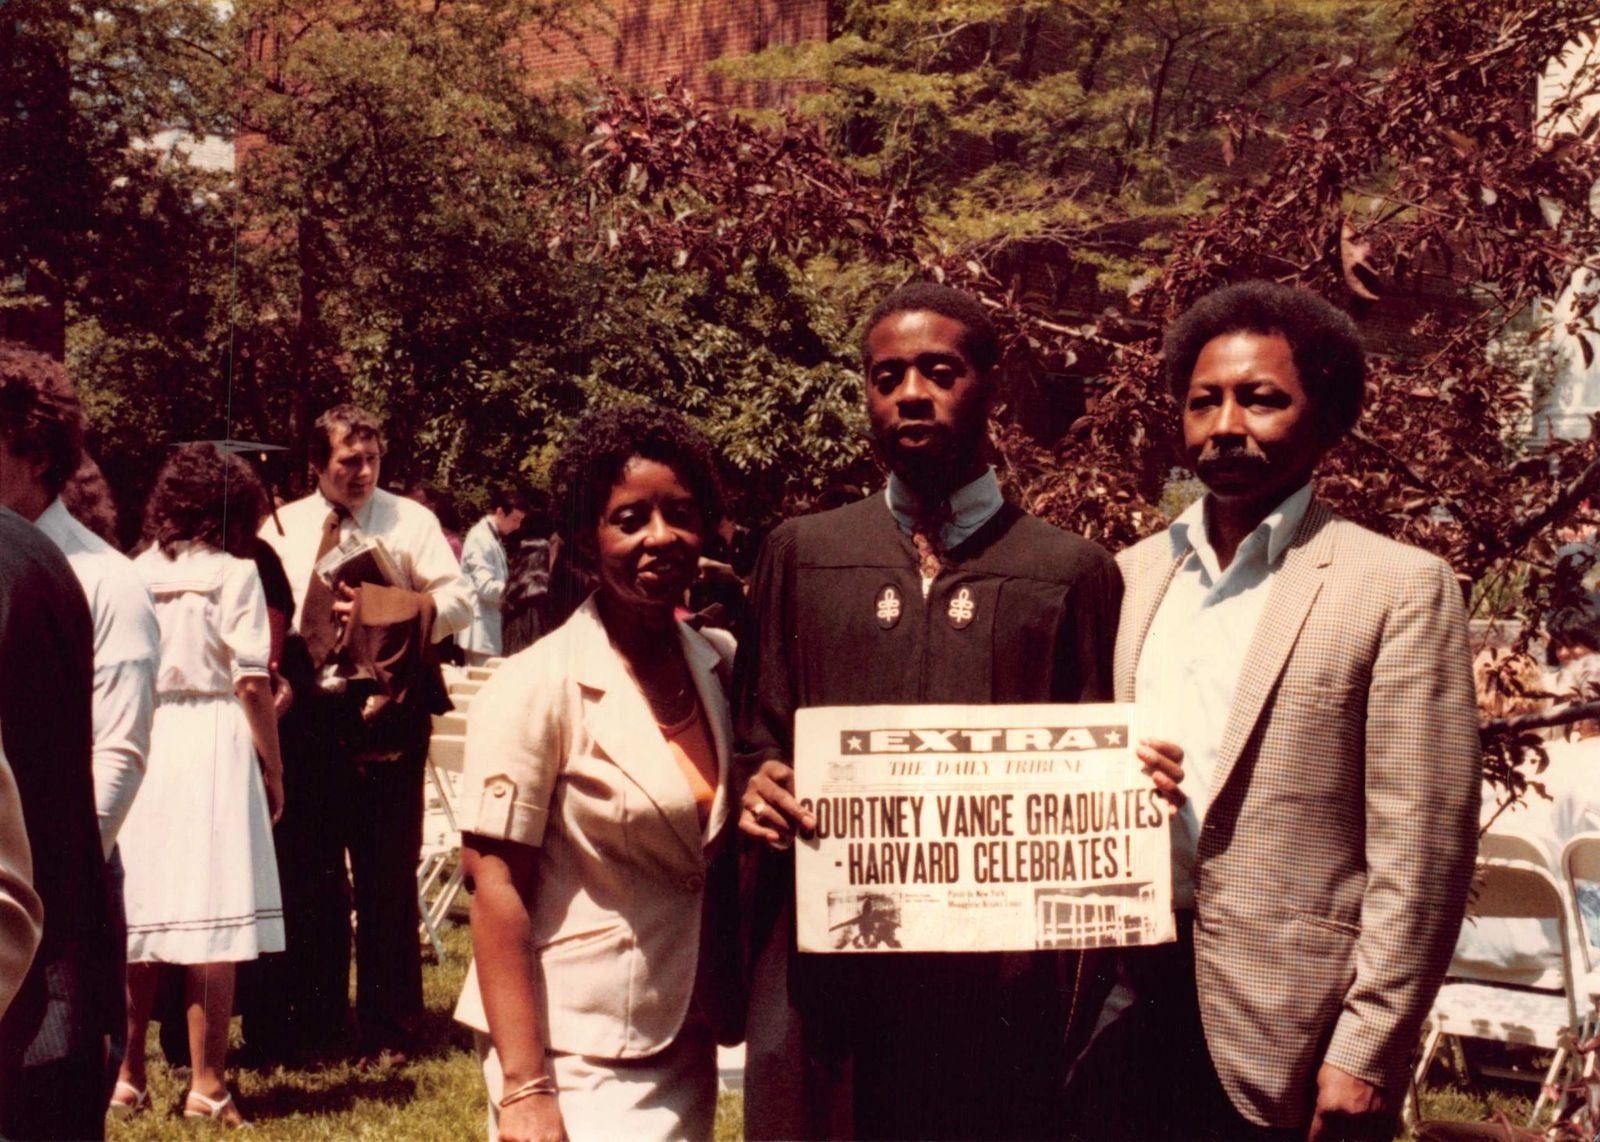 Courtney B Vance with his family at his Harvard University Commencement in 1982